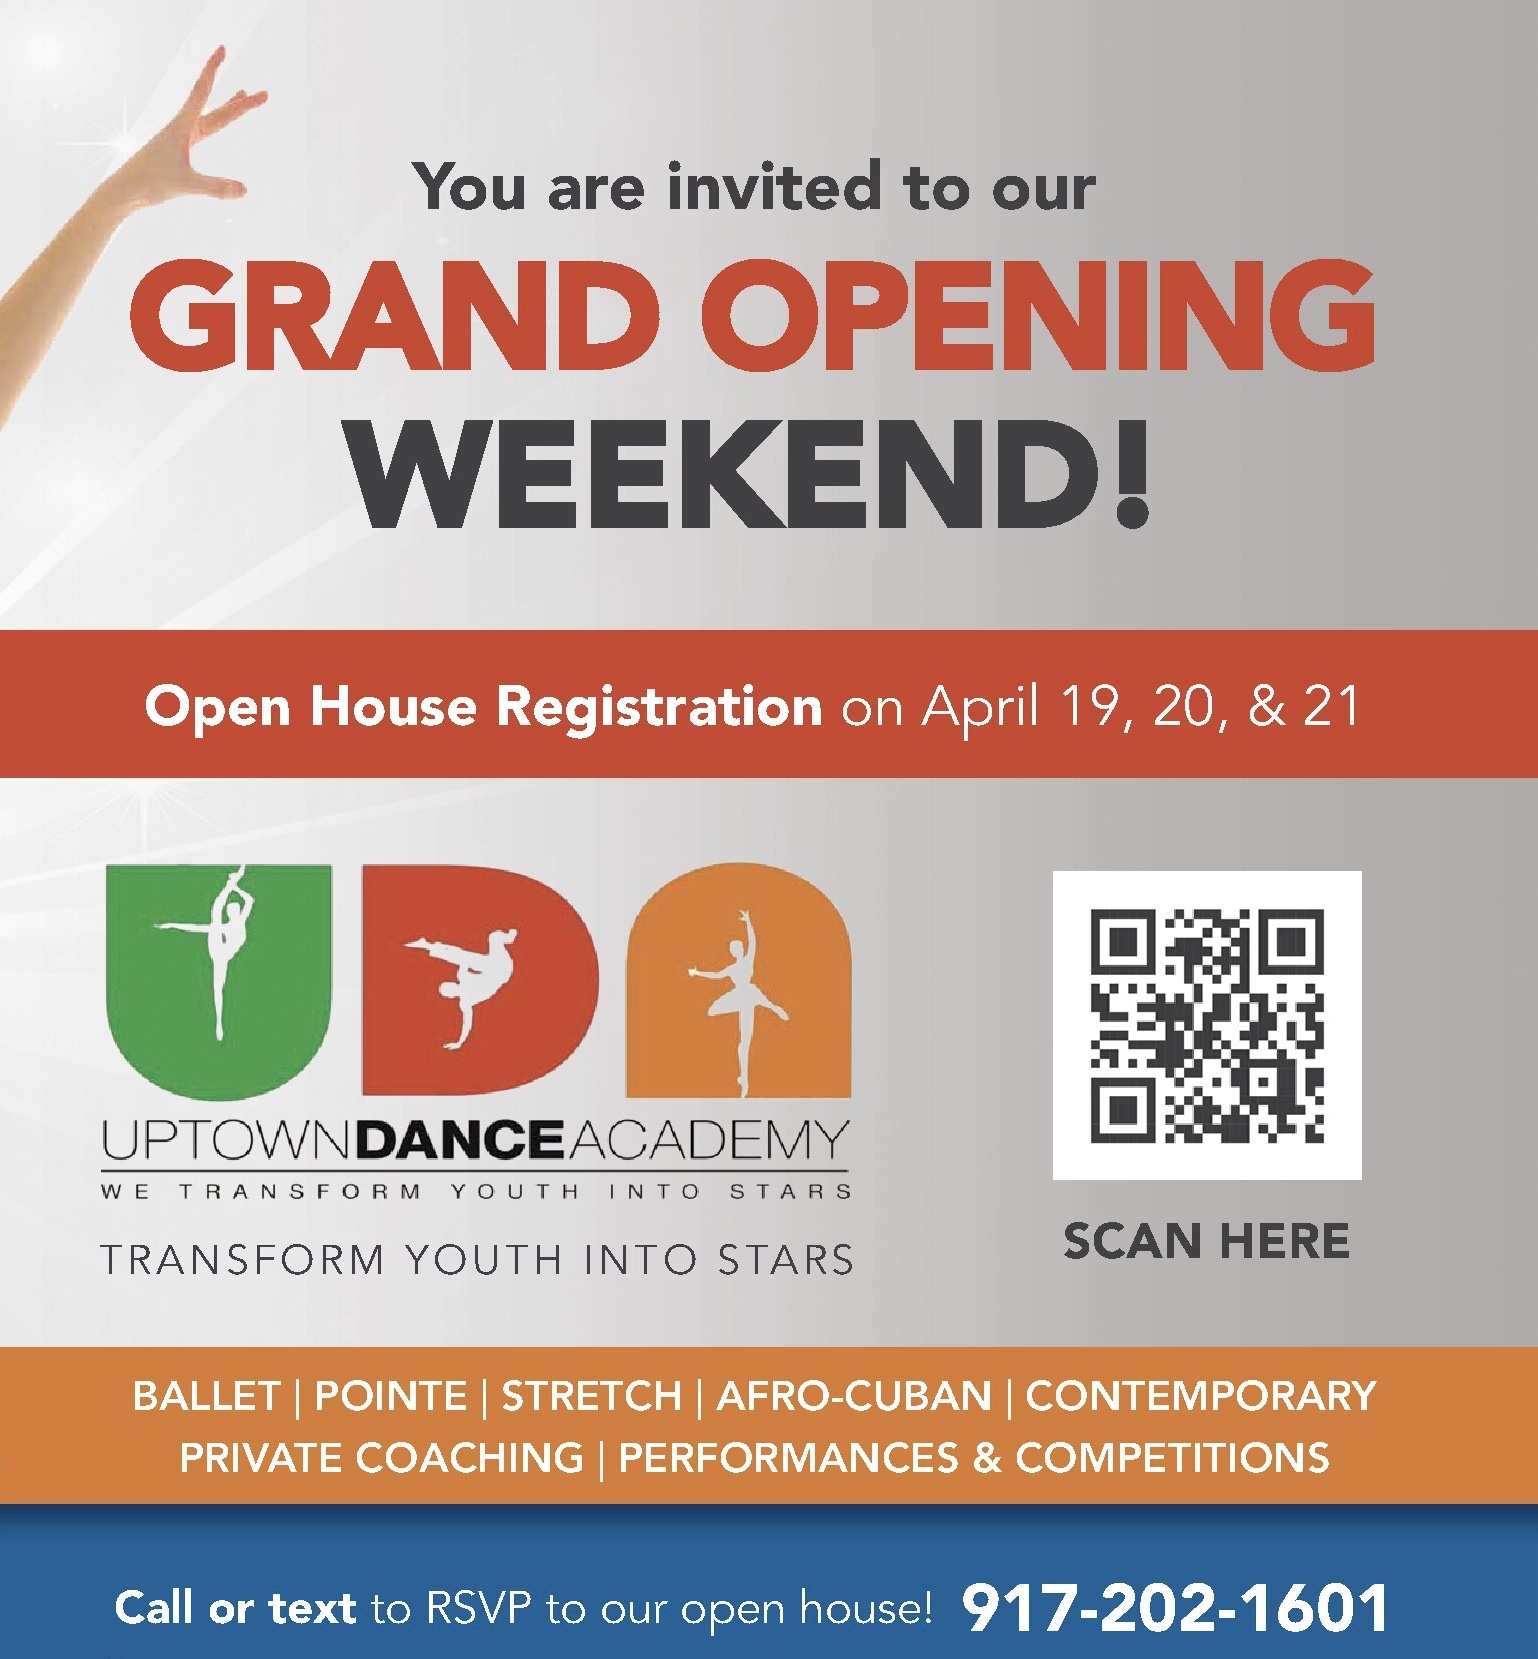 You are invited to our Grand Opening Weekend - April 19-21.